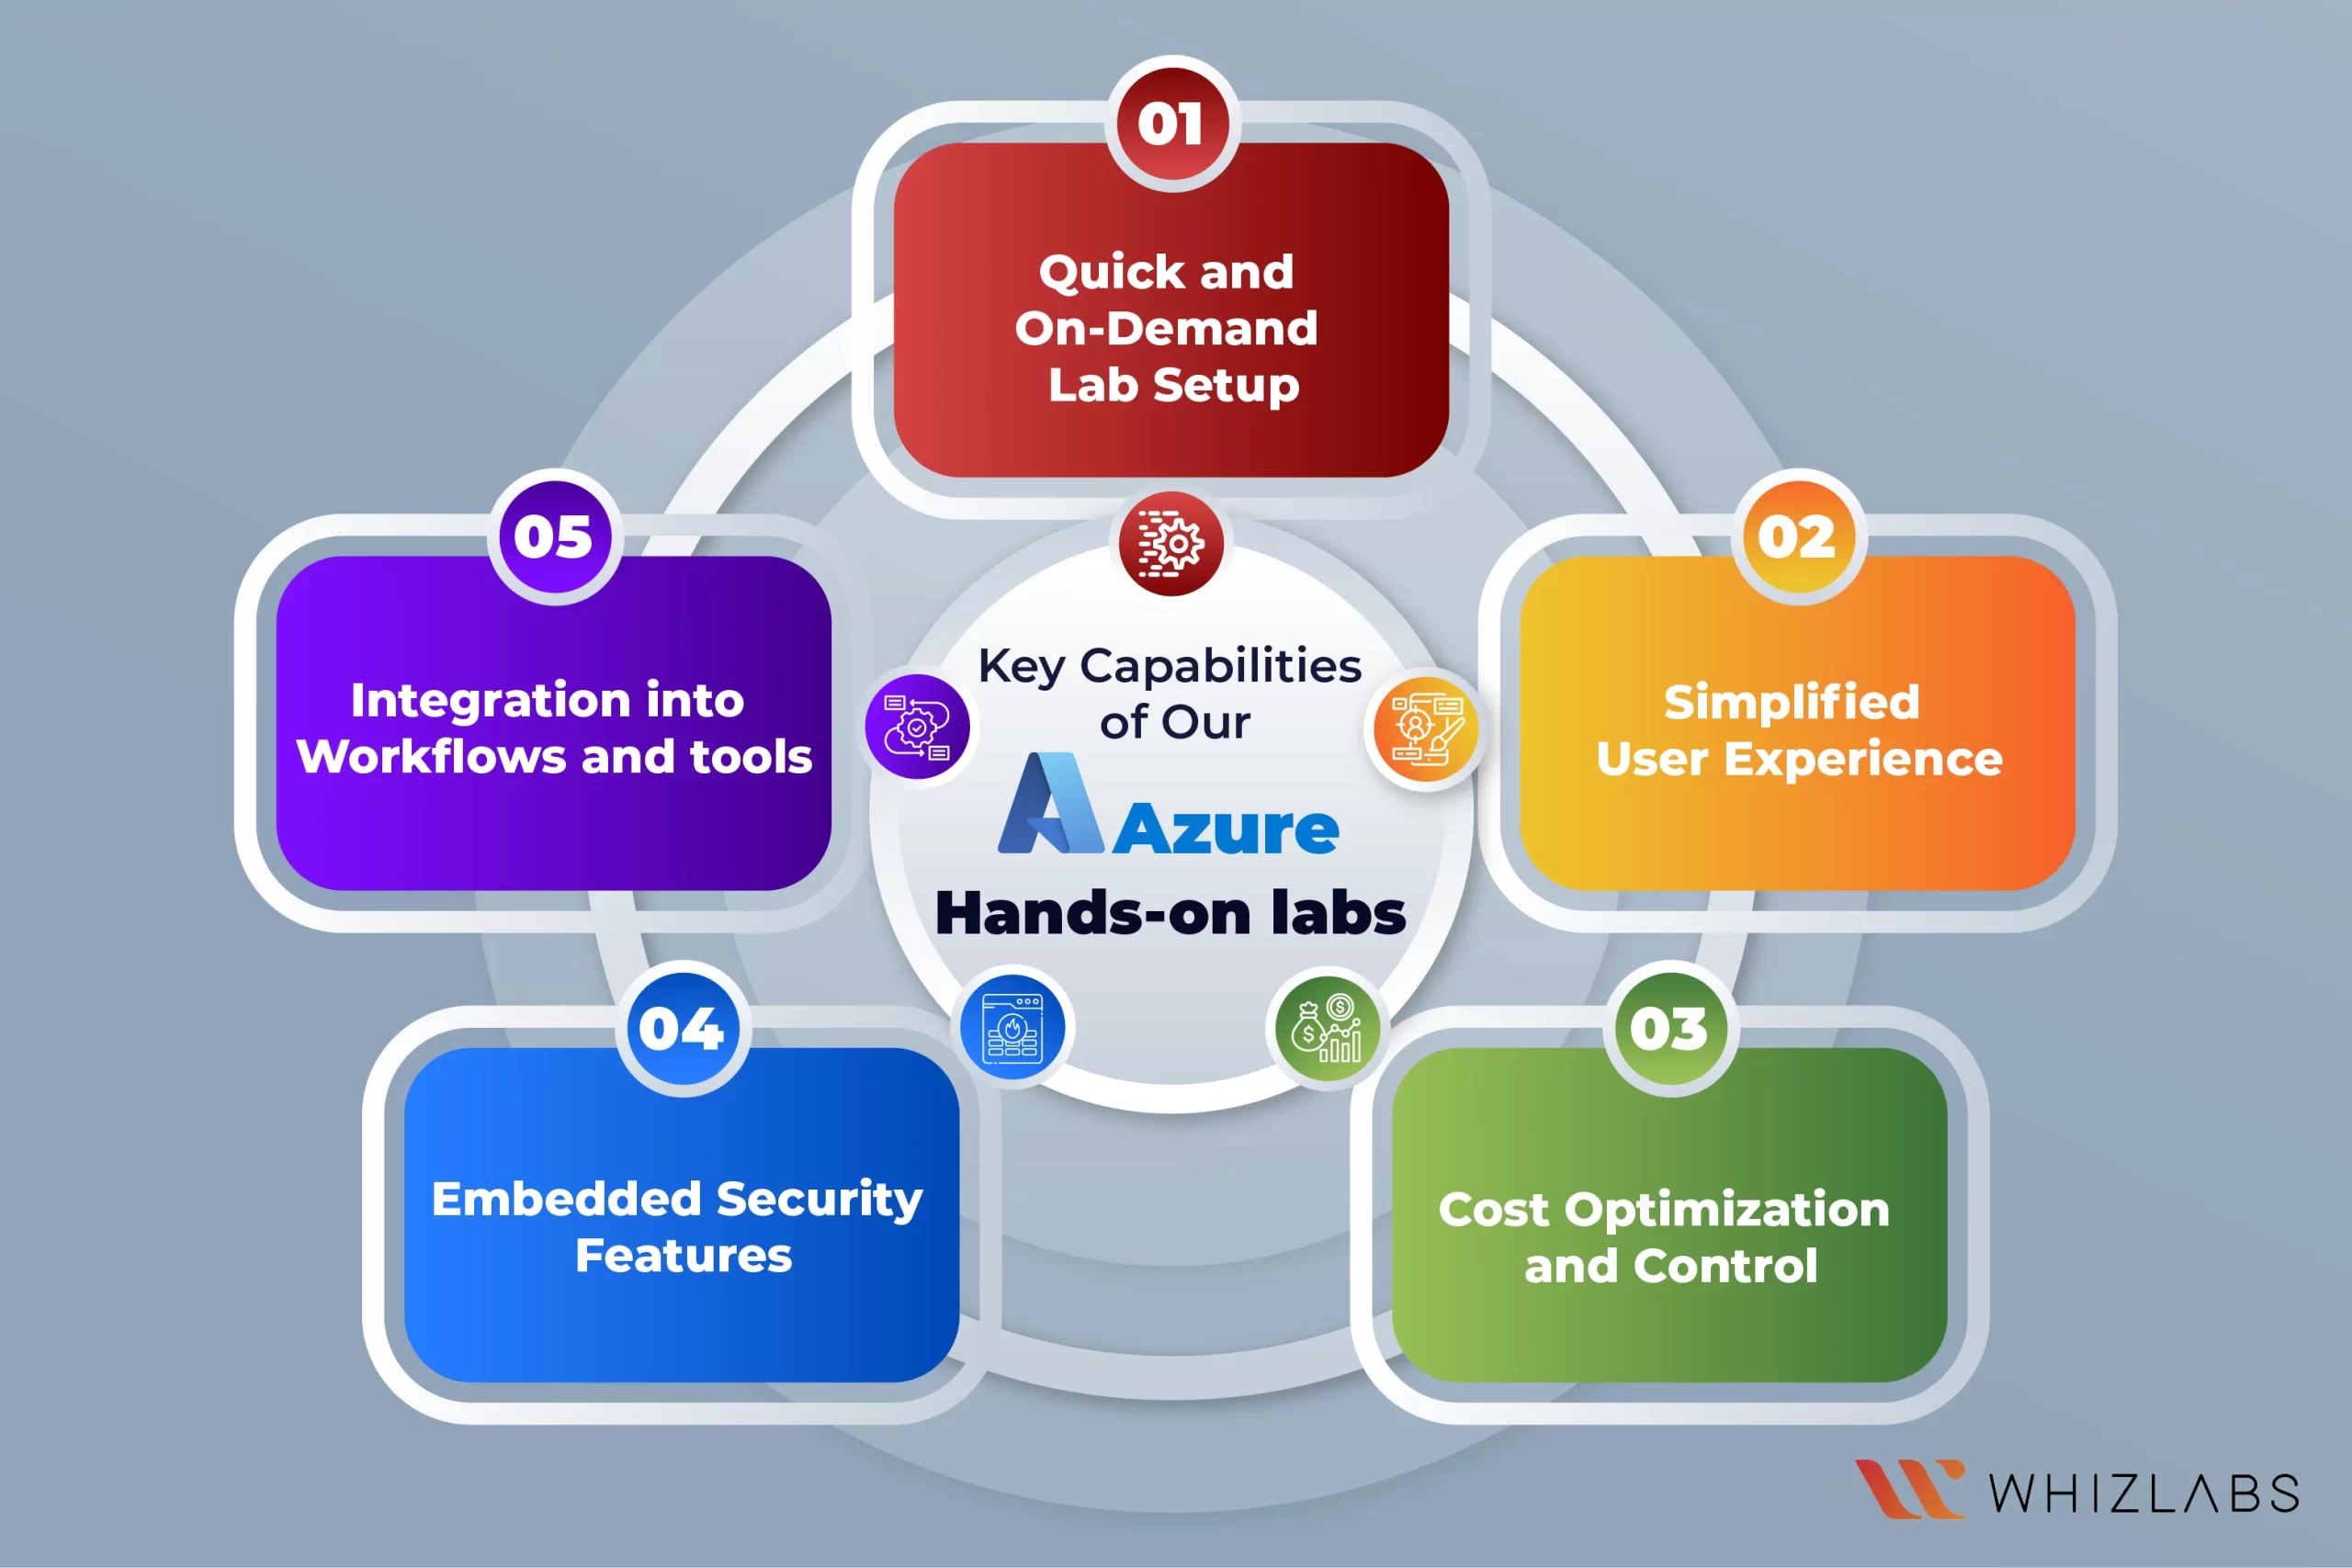 Key-capabilities-of-our-Azure-Hands-on-labs